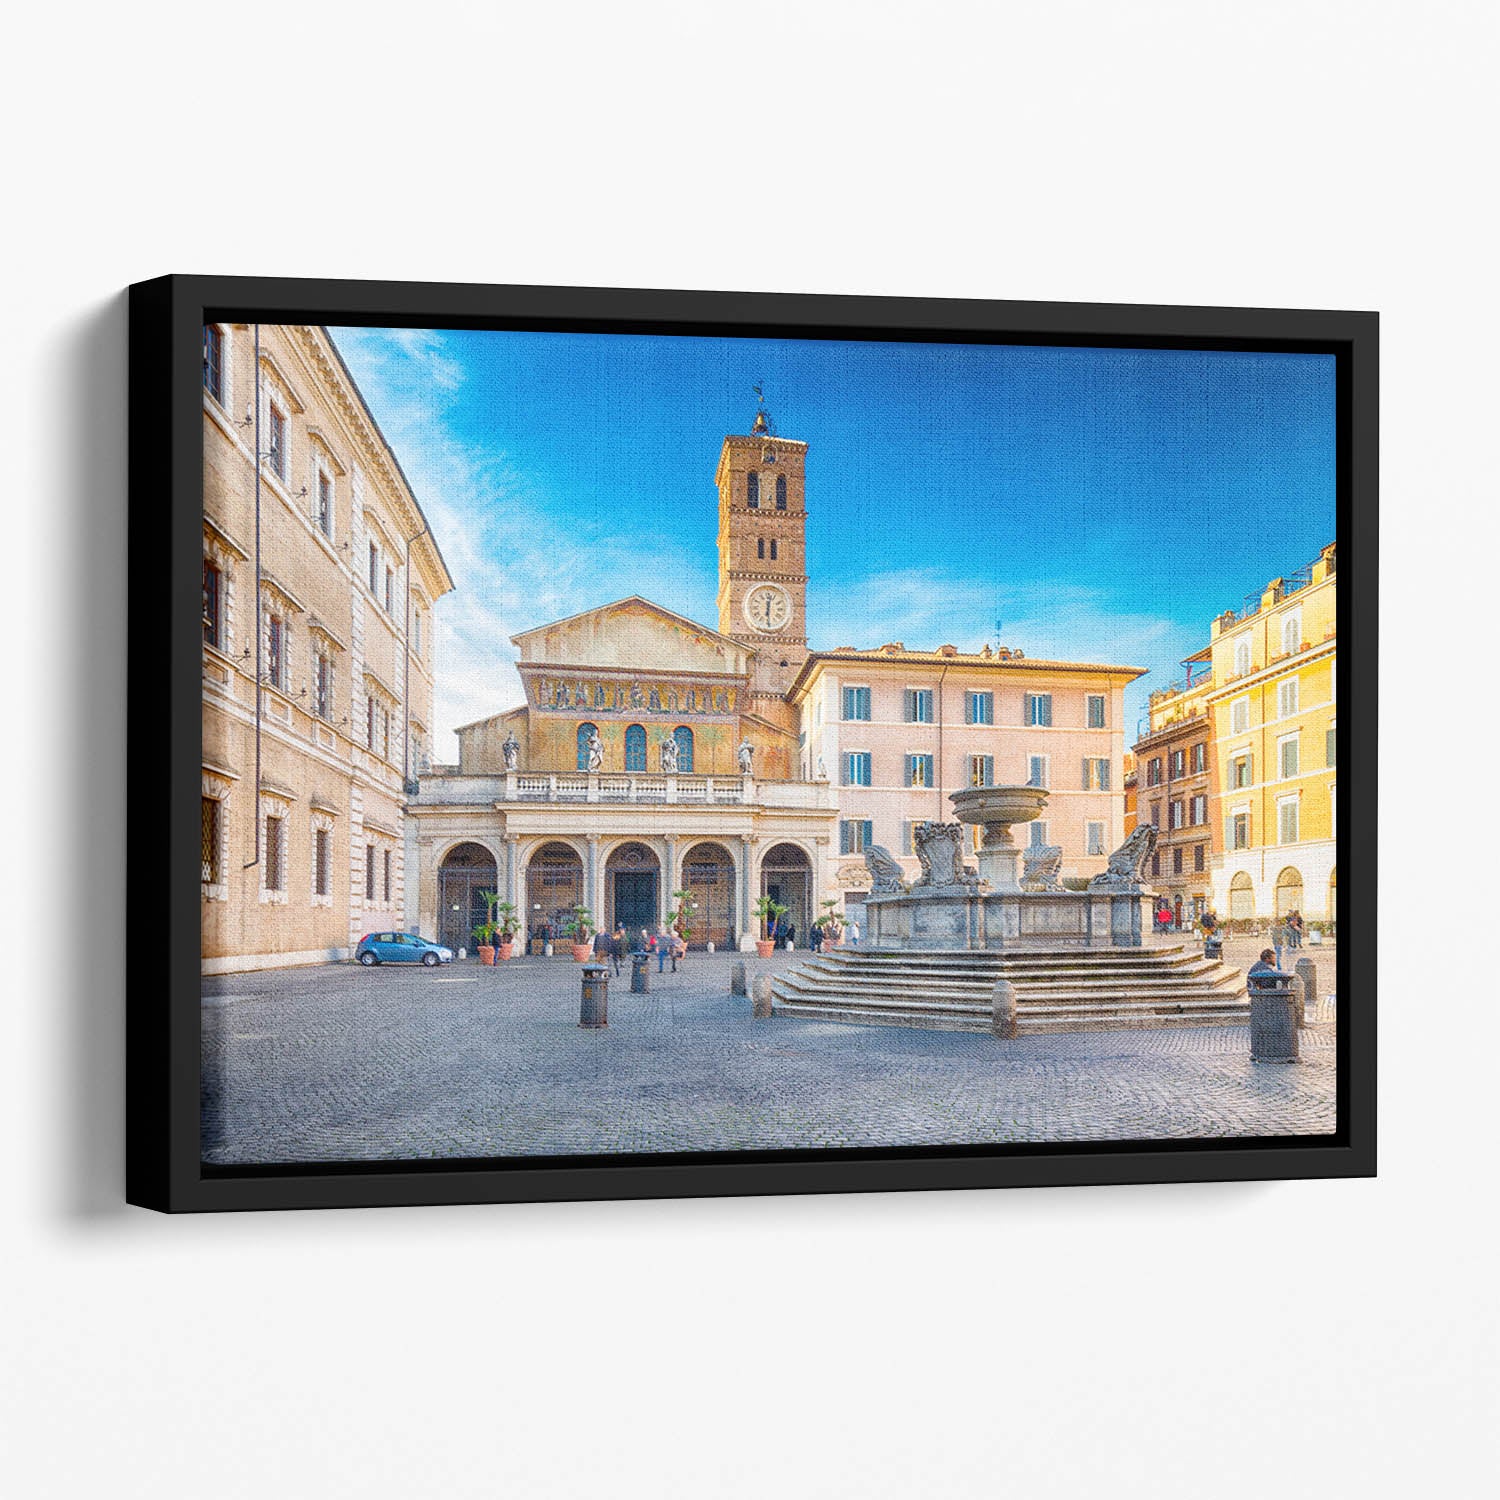 Basilica of Saint Mary in Rome Floating Framed Canvas